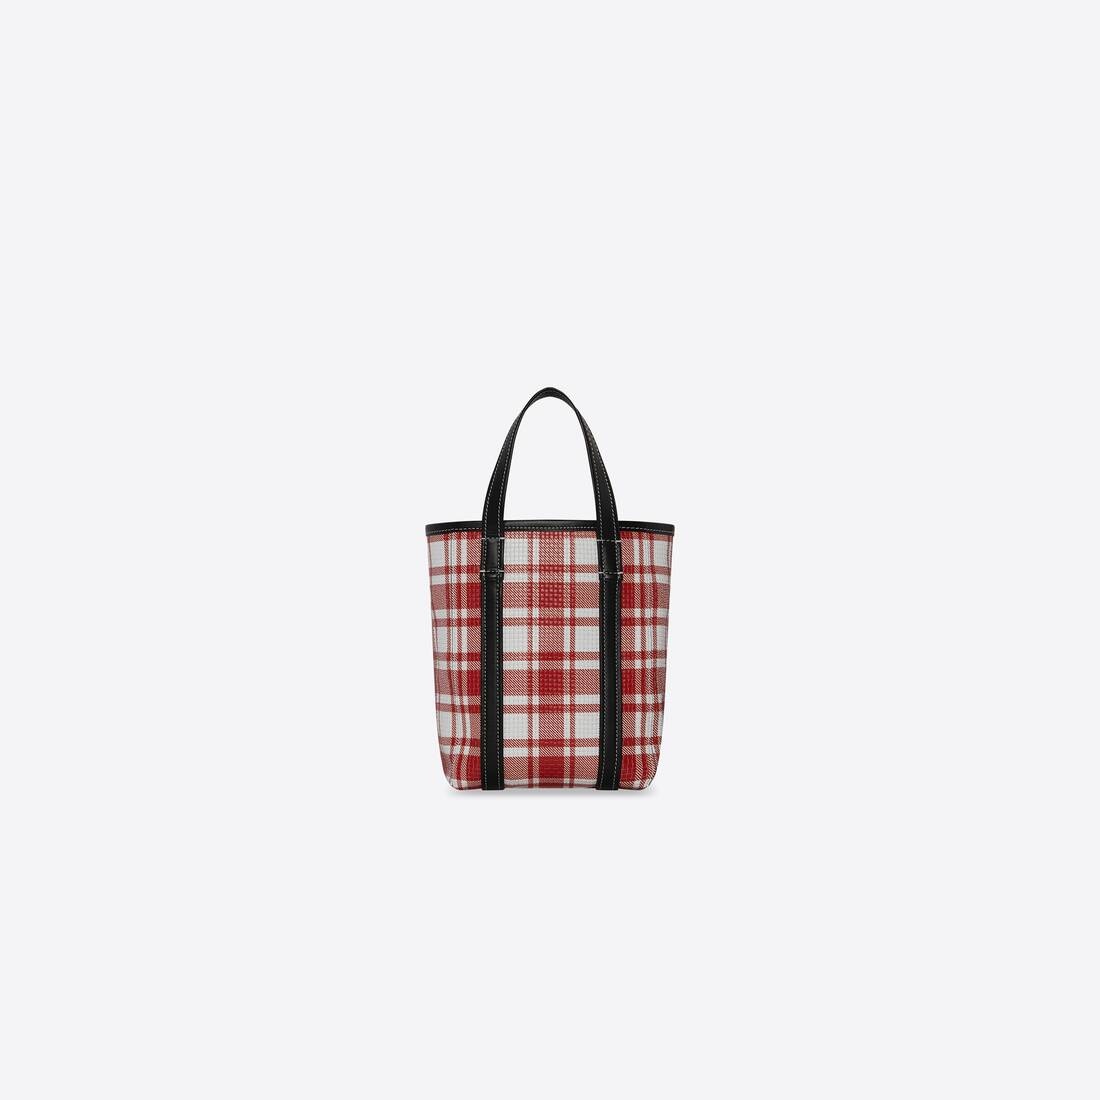 Women's Barbes Small North-south Shopper Bag Check Printed in Red - 2